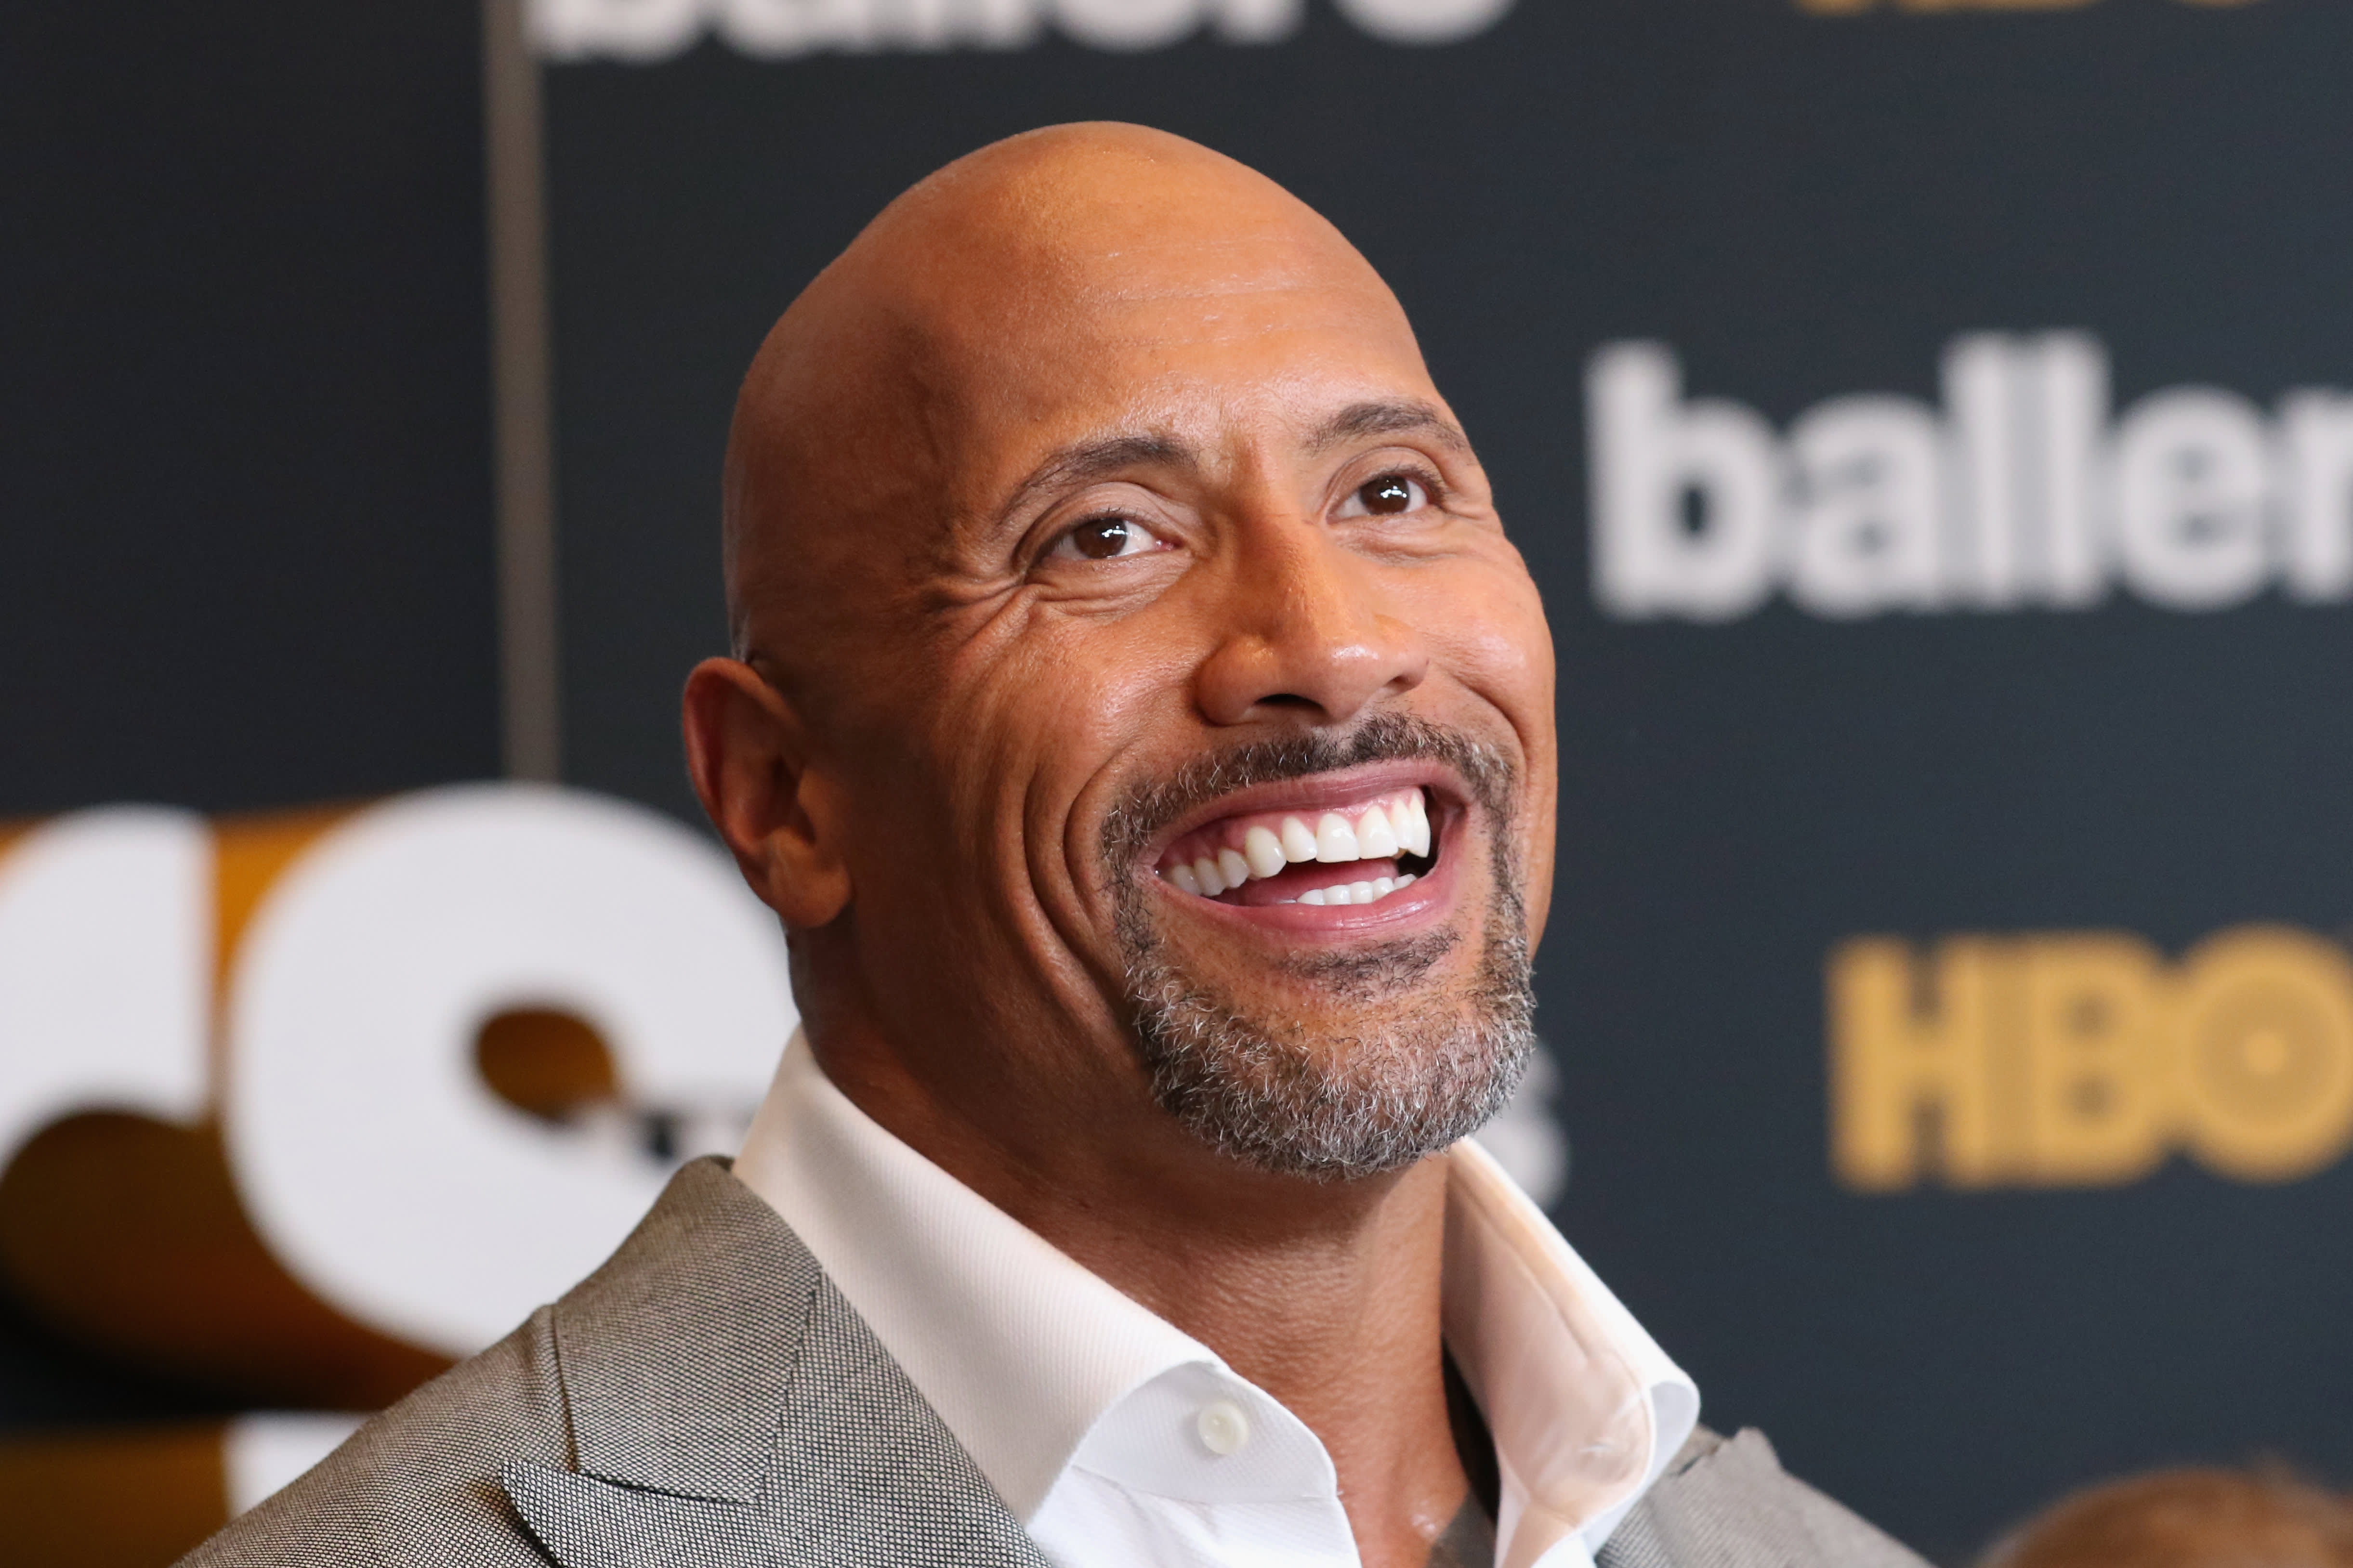 Dwayne 'The Rock' Johnson: The key to success and starting a business during Covid